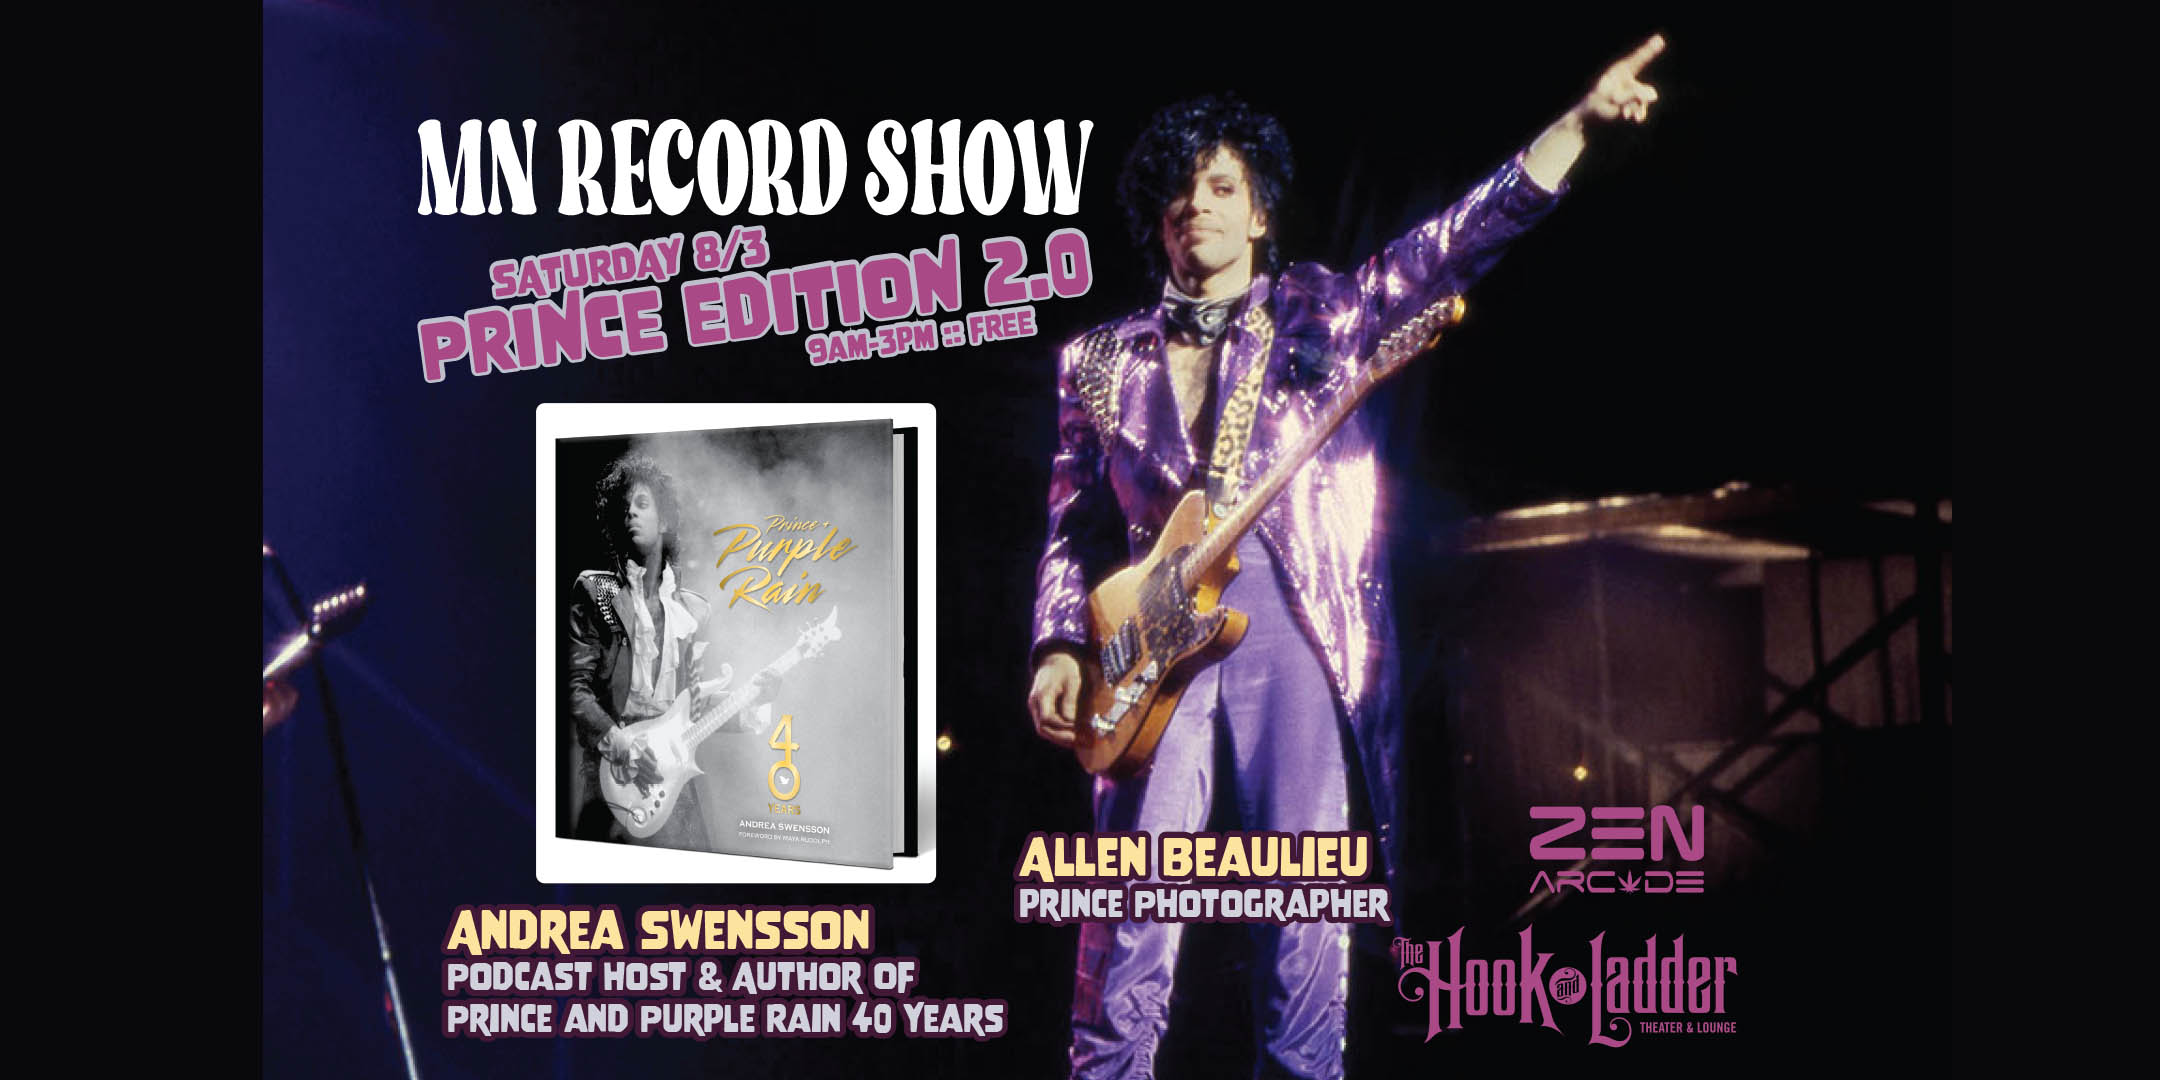 MN Record Show The Prince Edition 2.0 Saturday, August 3rd The Hook and Ladder Theater 9am-3pm FREE to attend!